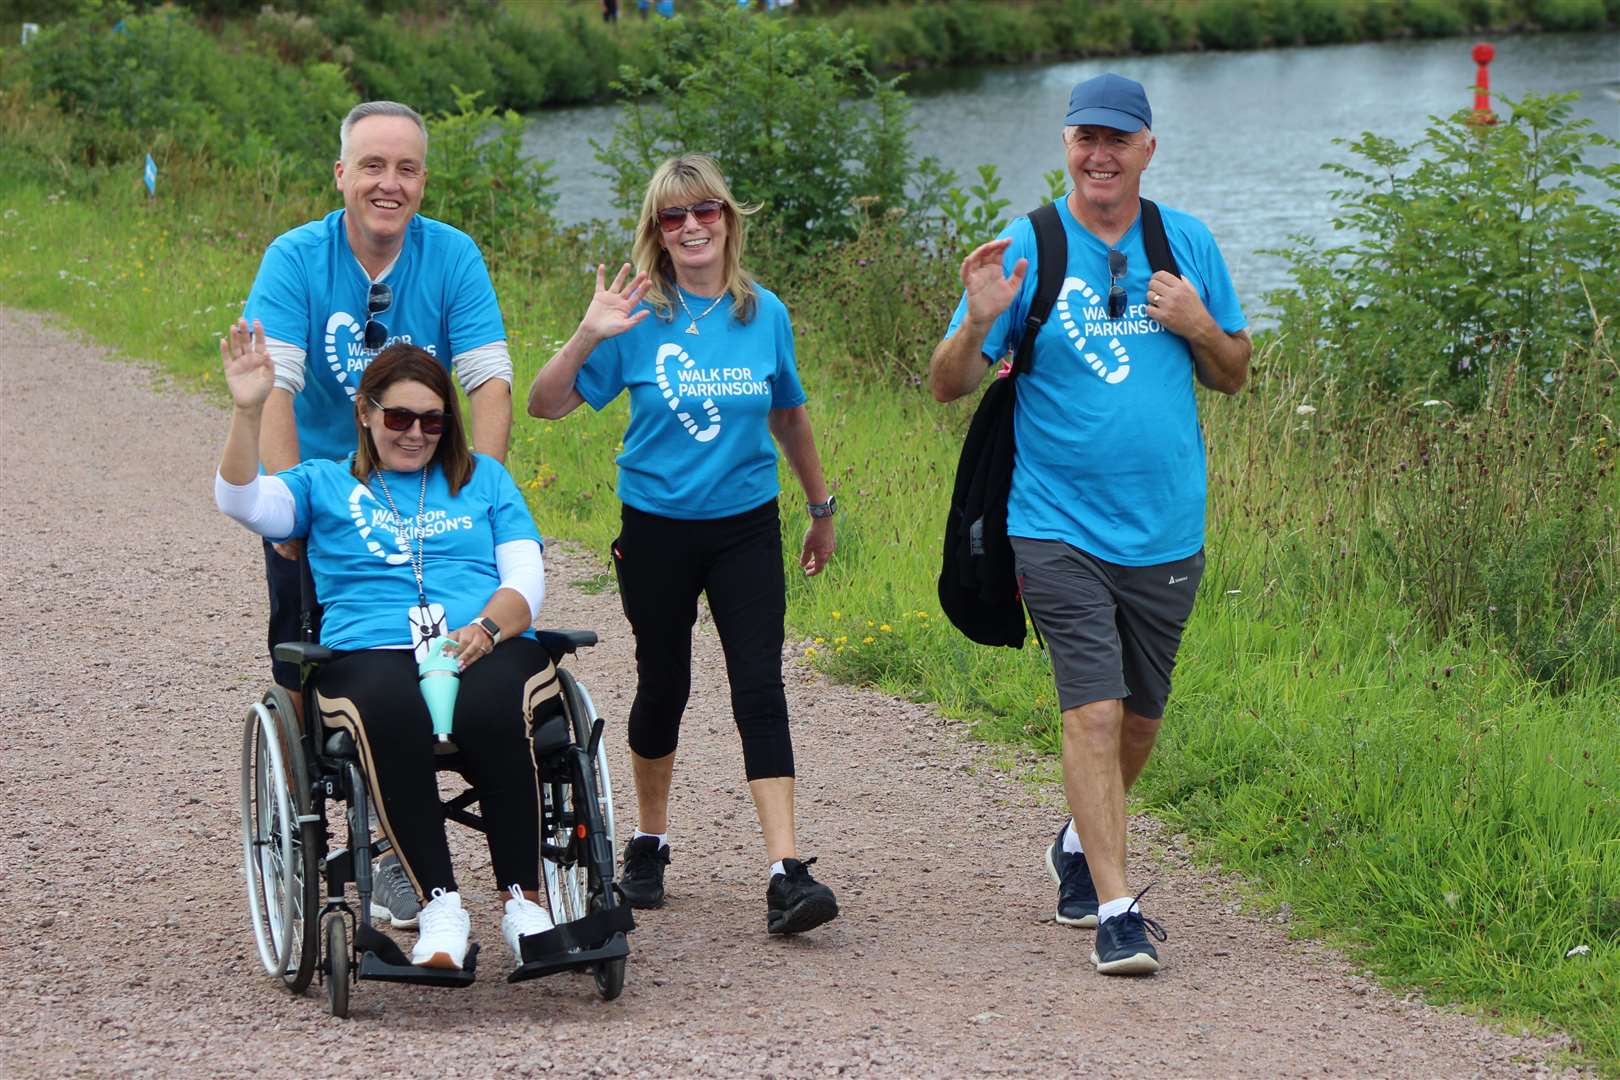 Walkers enjoyed the unexpected sunshine on the day. Pictures: Iain Stephen Morrison/Parkinson's UK.